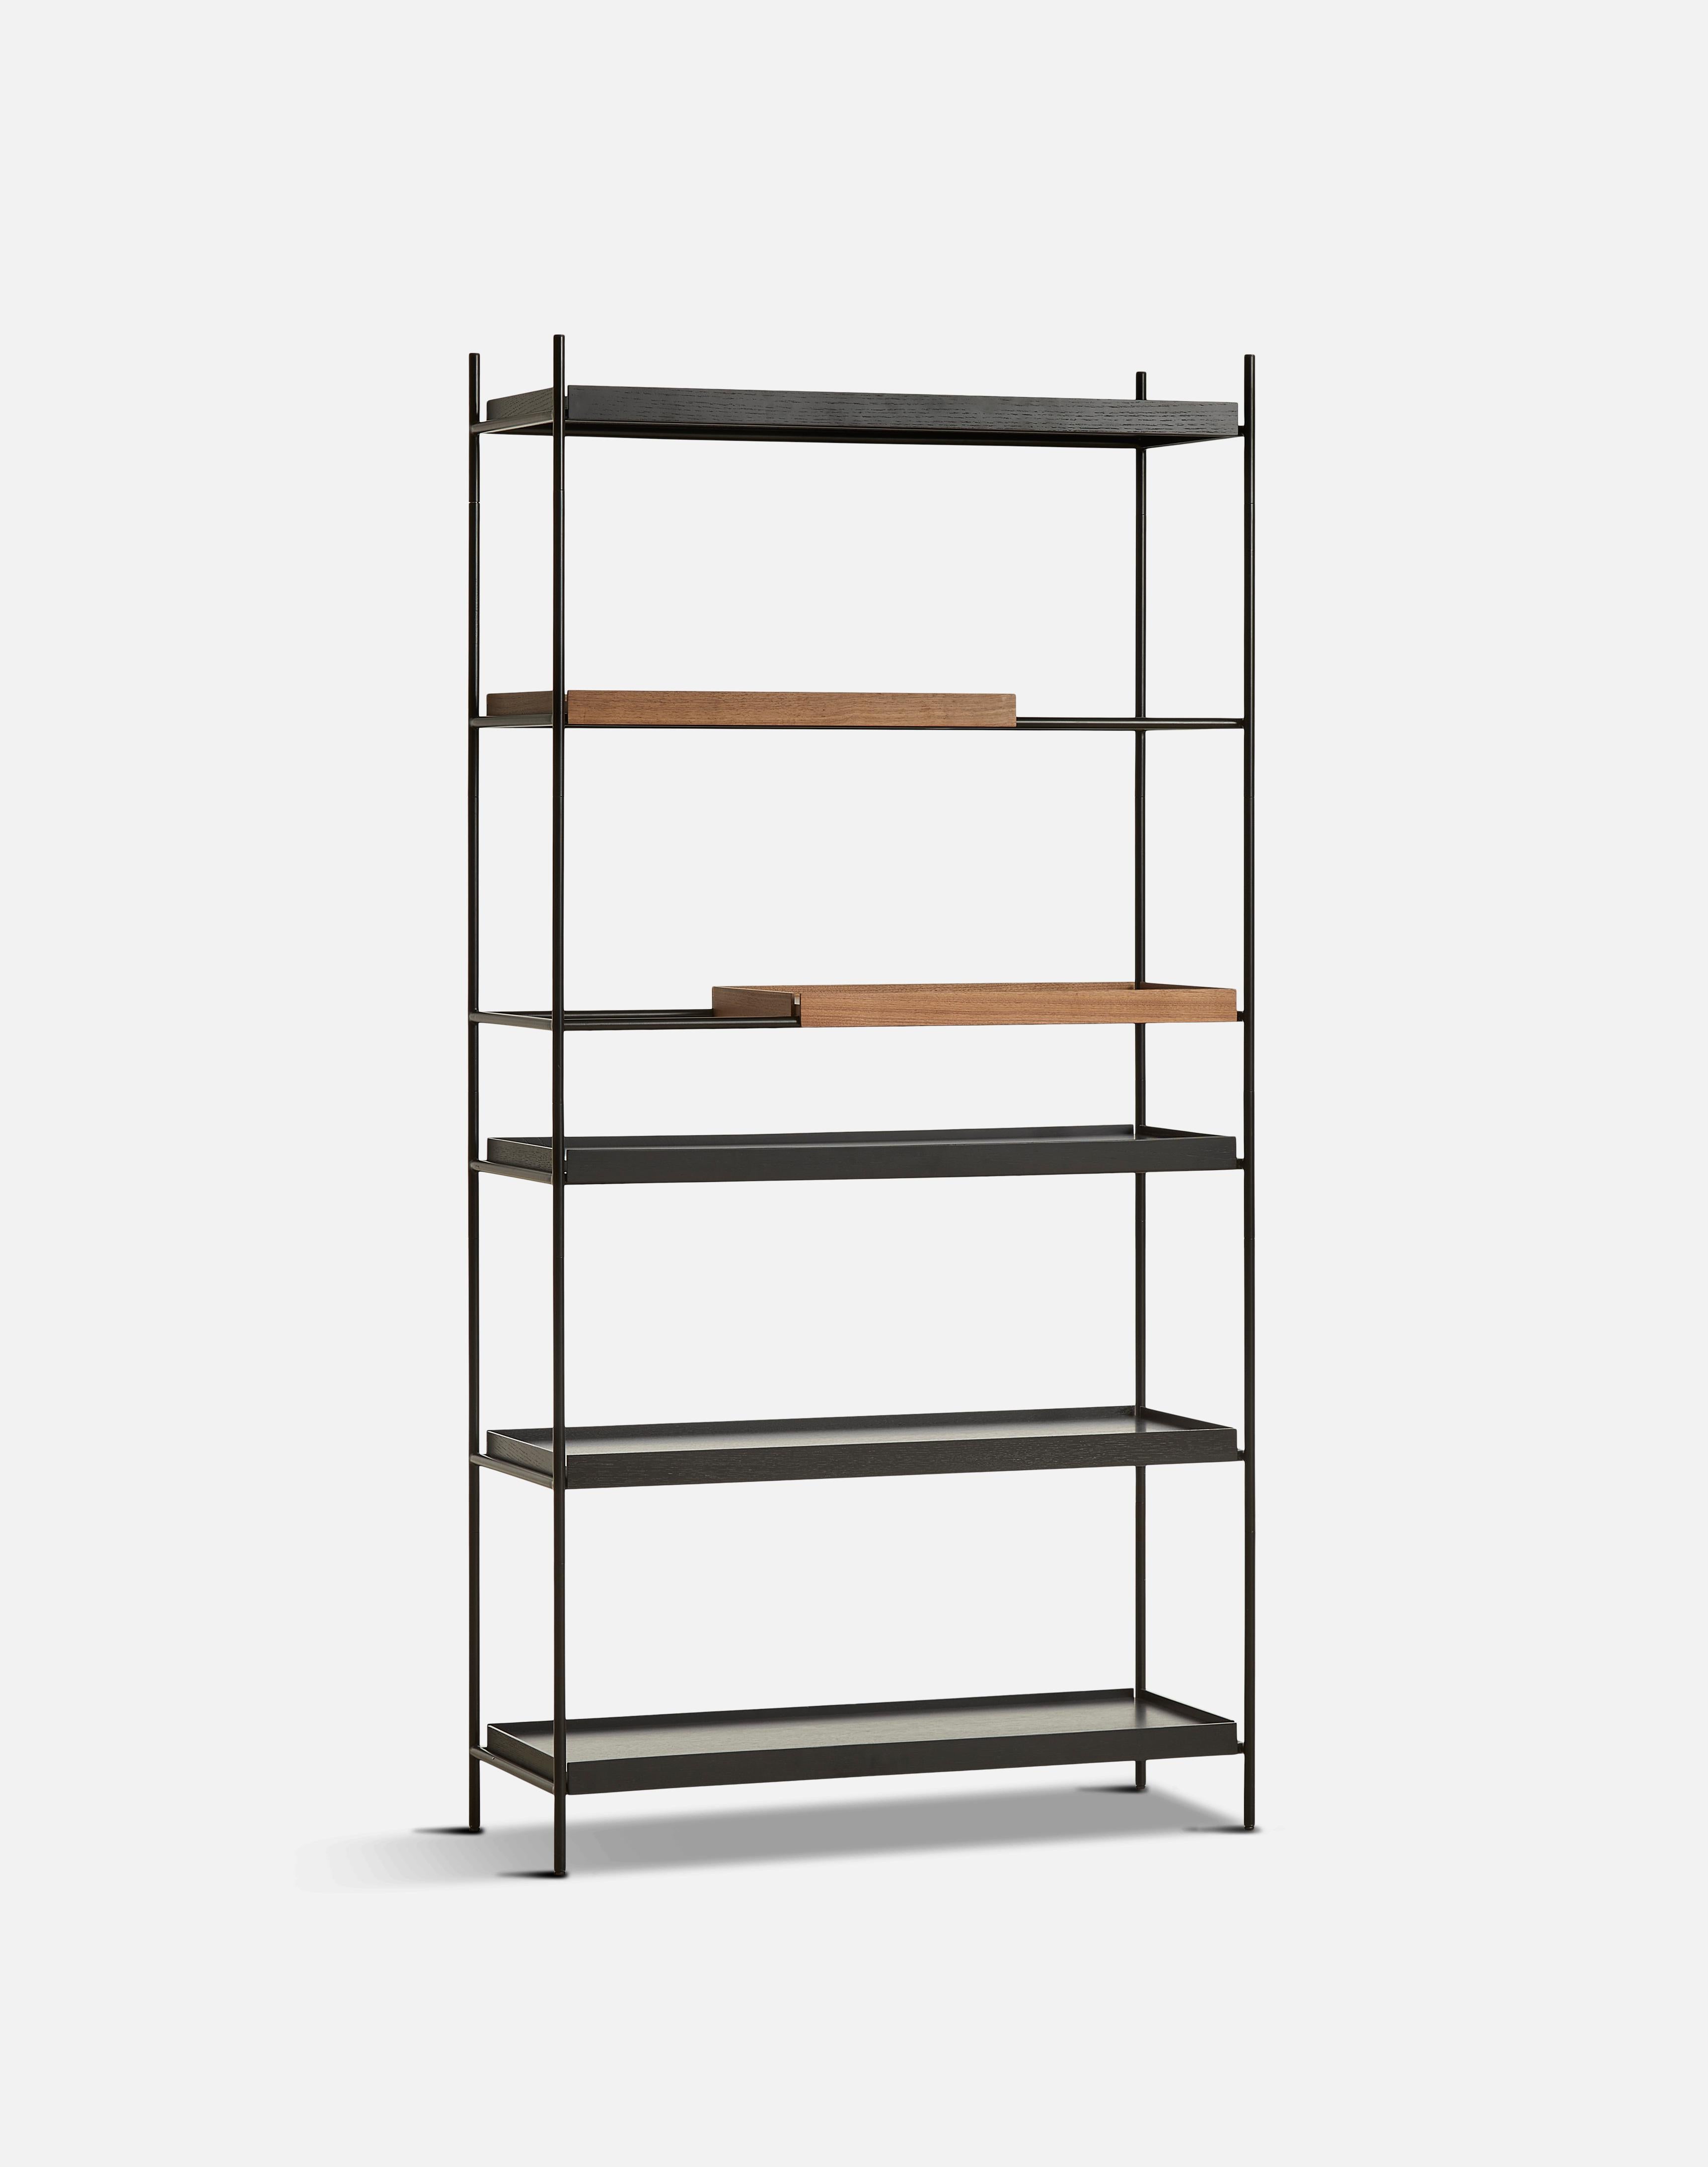 High walnut and black tray shelf VI by Hanne Willmann.
Materials: metal, walnut.
Dimensions: D 40 x W 100 x H 201 cm.
Also available in different tray conbinations and 2 sizes: H81, H 201 cm.

Hanne Willmann is a dynamic German designer with